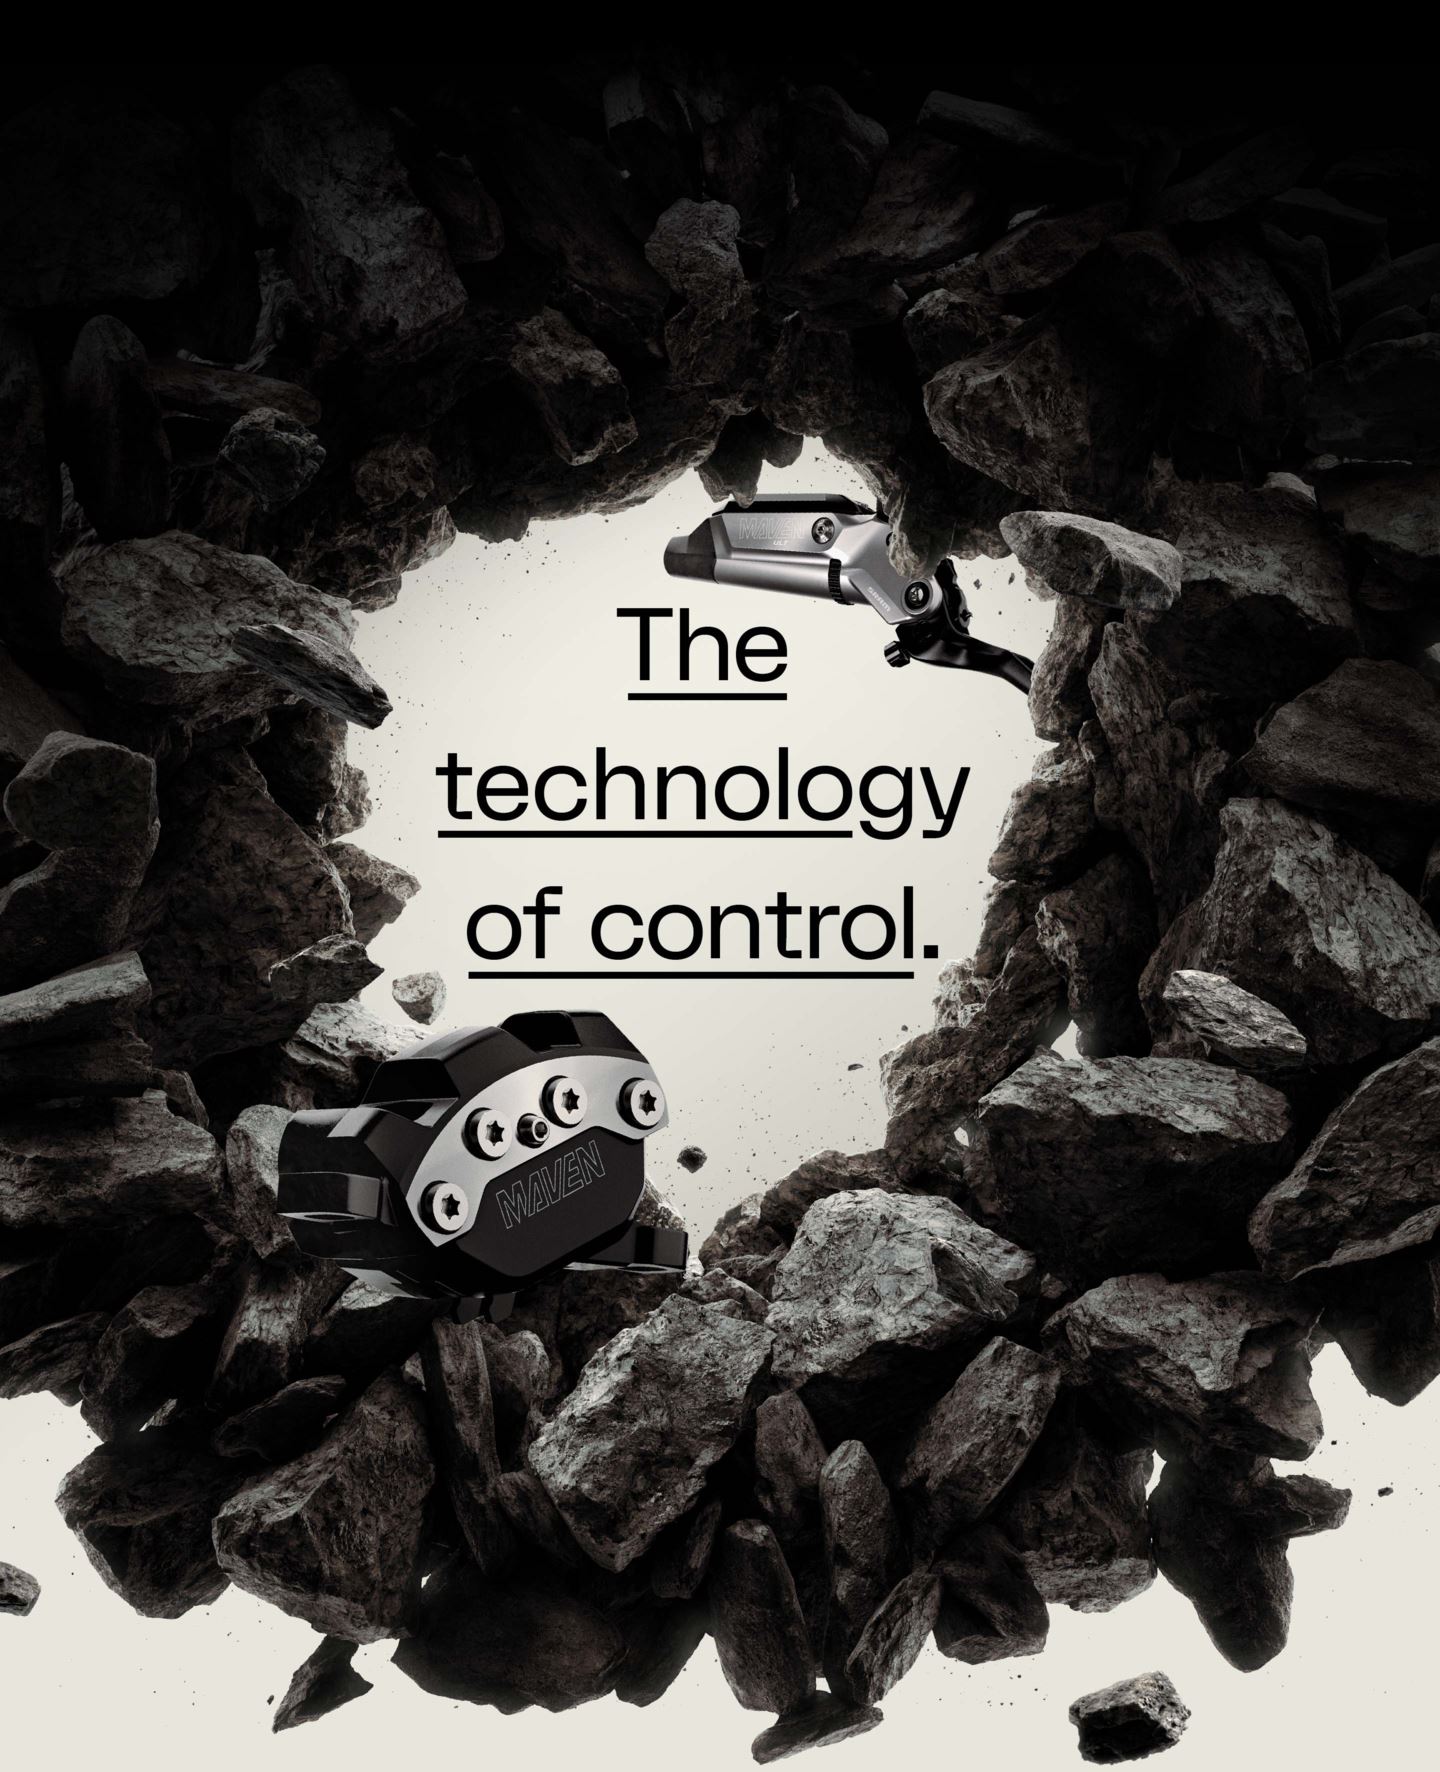 The technology of control.